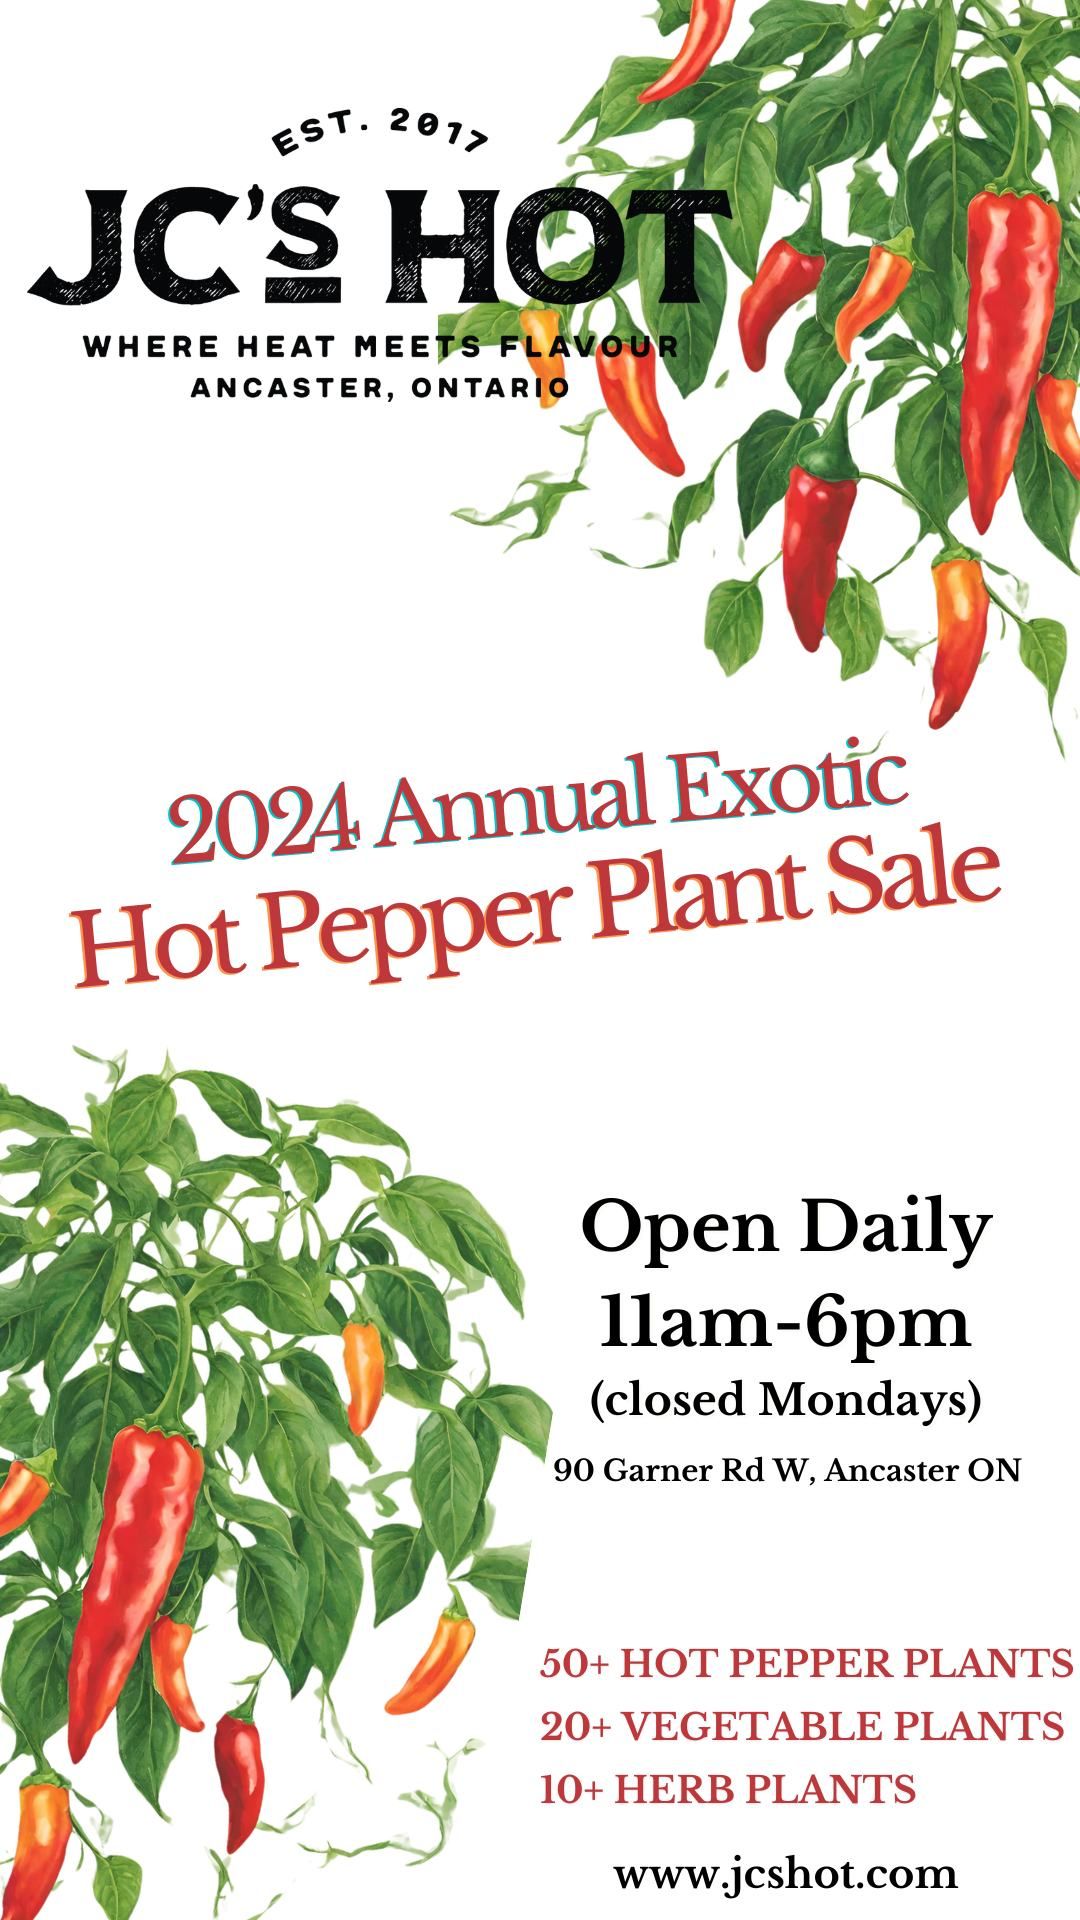 JC's Hot Annual Exotic Hot Pepper Plant Sale